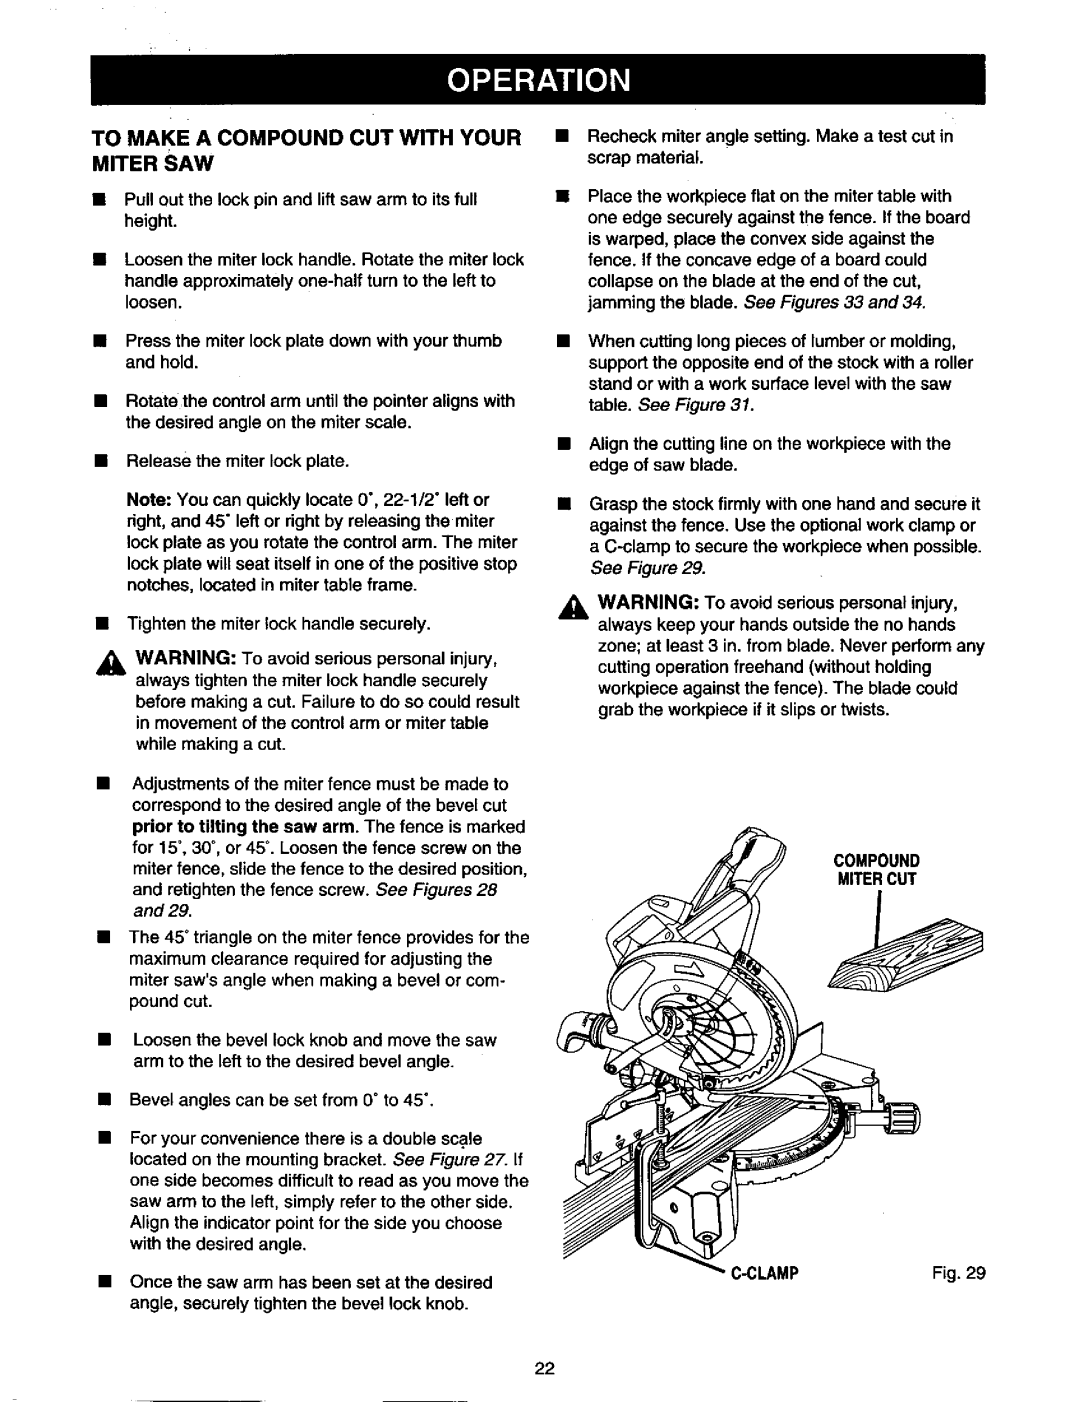 Craftsman 315.21213 manual To Make A Compound Cut With Your Miter Saw, table. See Figure 